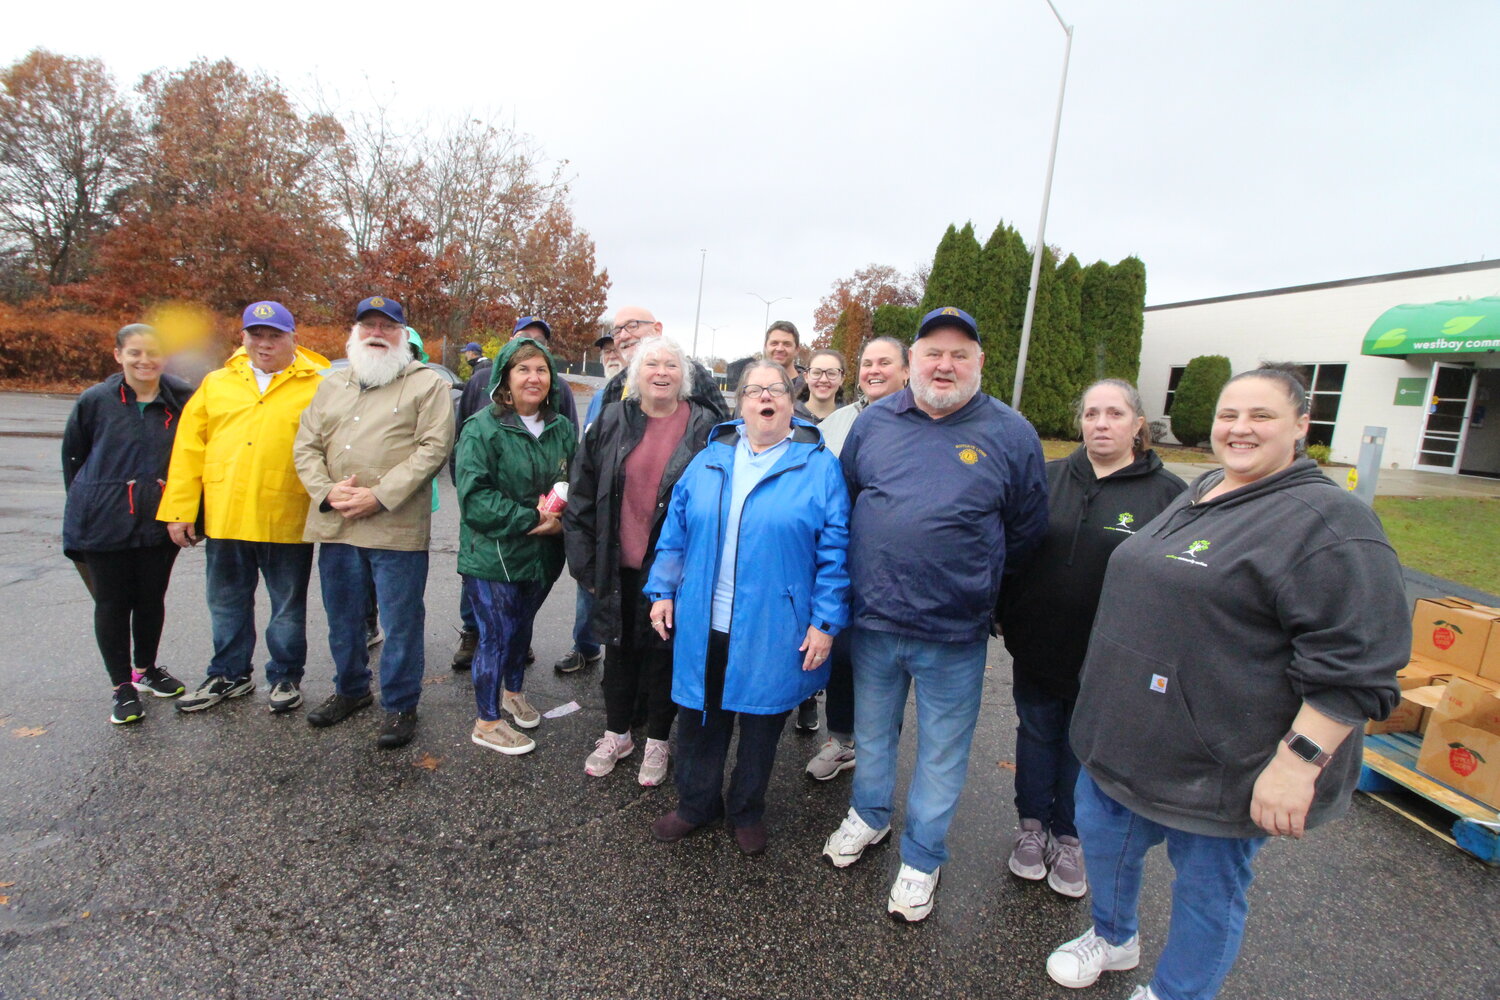 TEAMING UP TO HELP: In a break from the action members of the Scituate Lions Club gather with Westbay staff and volunteers for a photo.